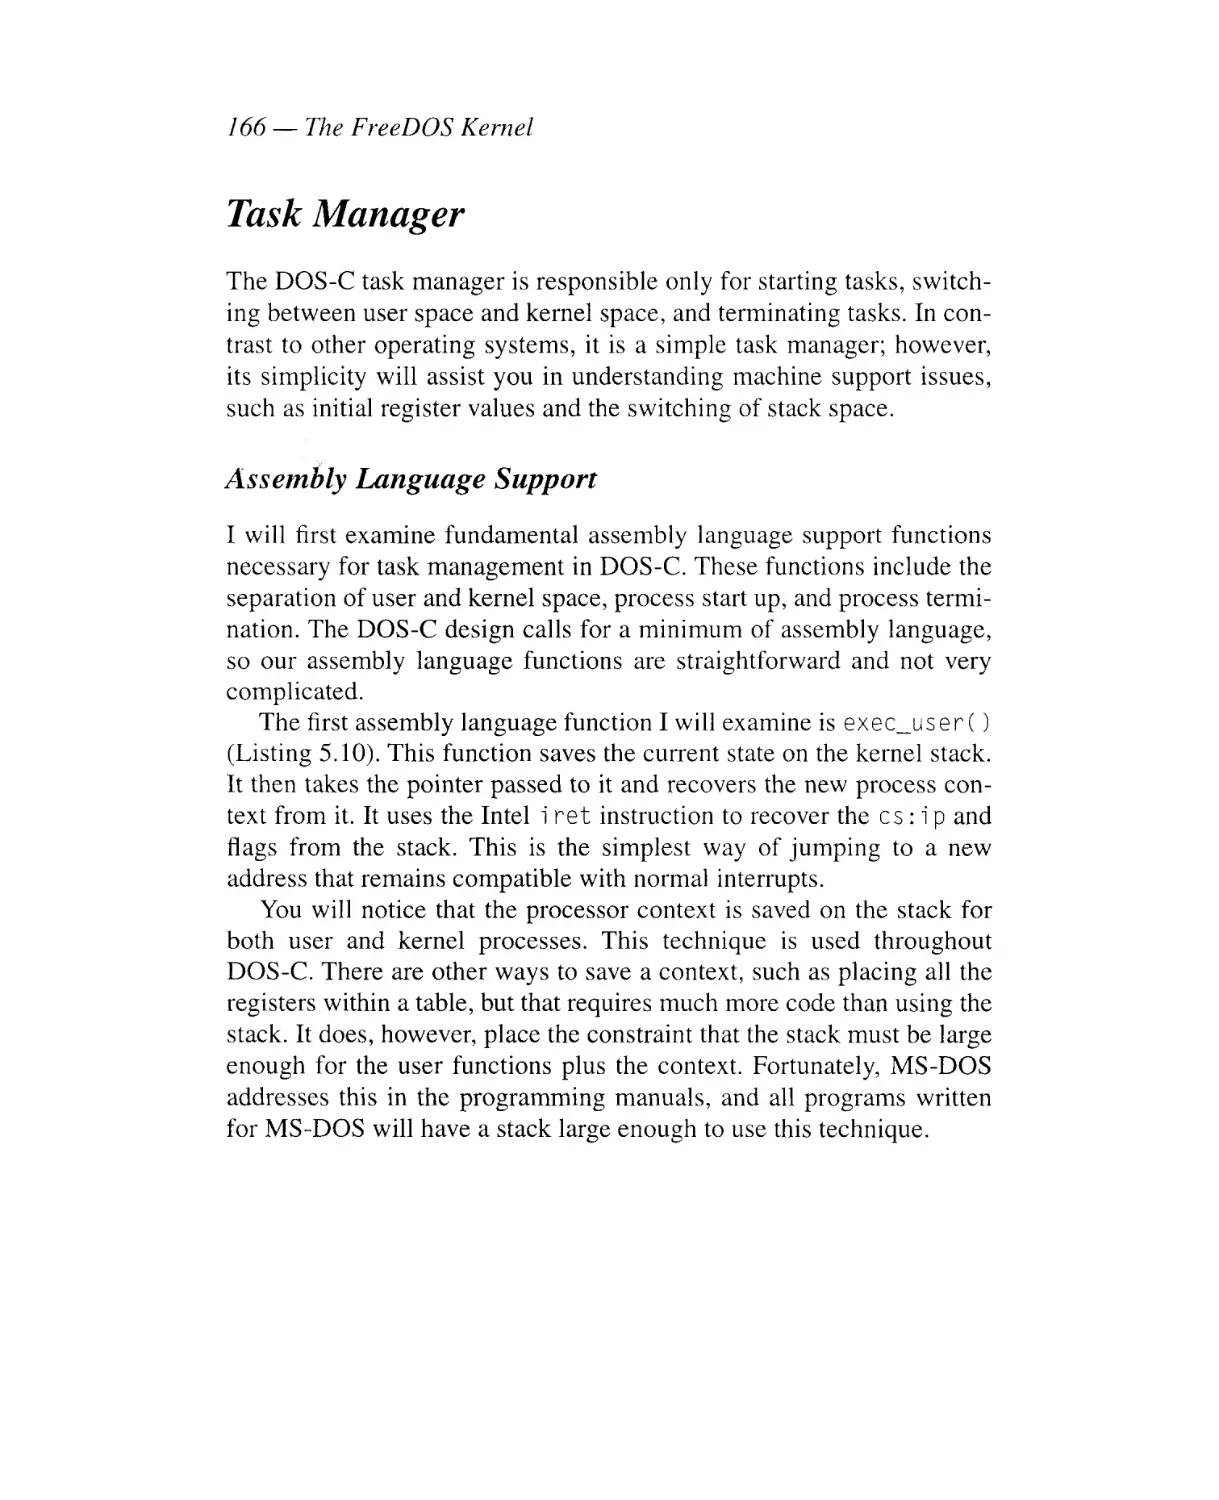 Task Manager
Assembly Language Support